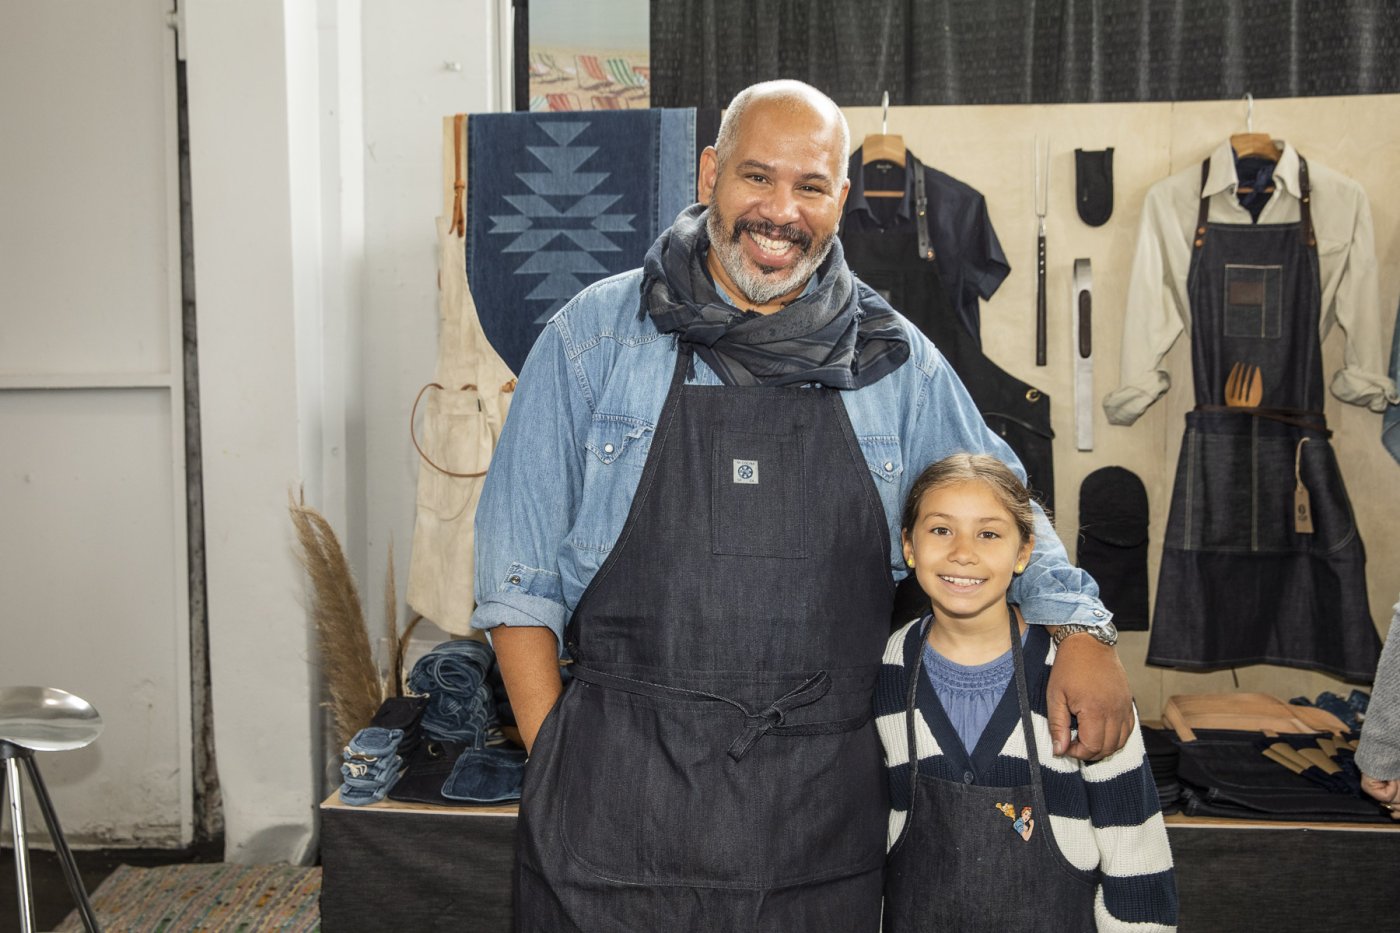 Artist Ulrich Conrad Simpson stands with his daughter in their durable denim aprons.